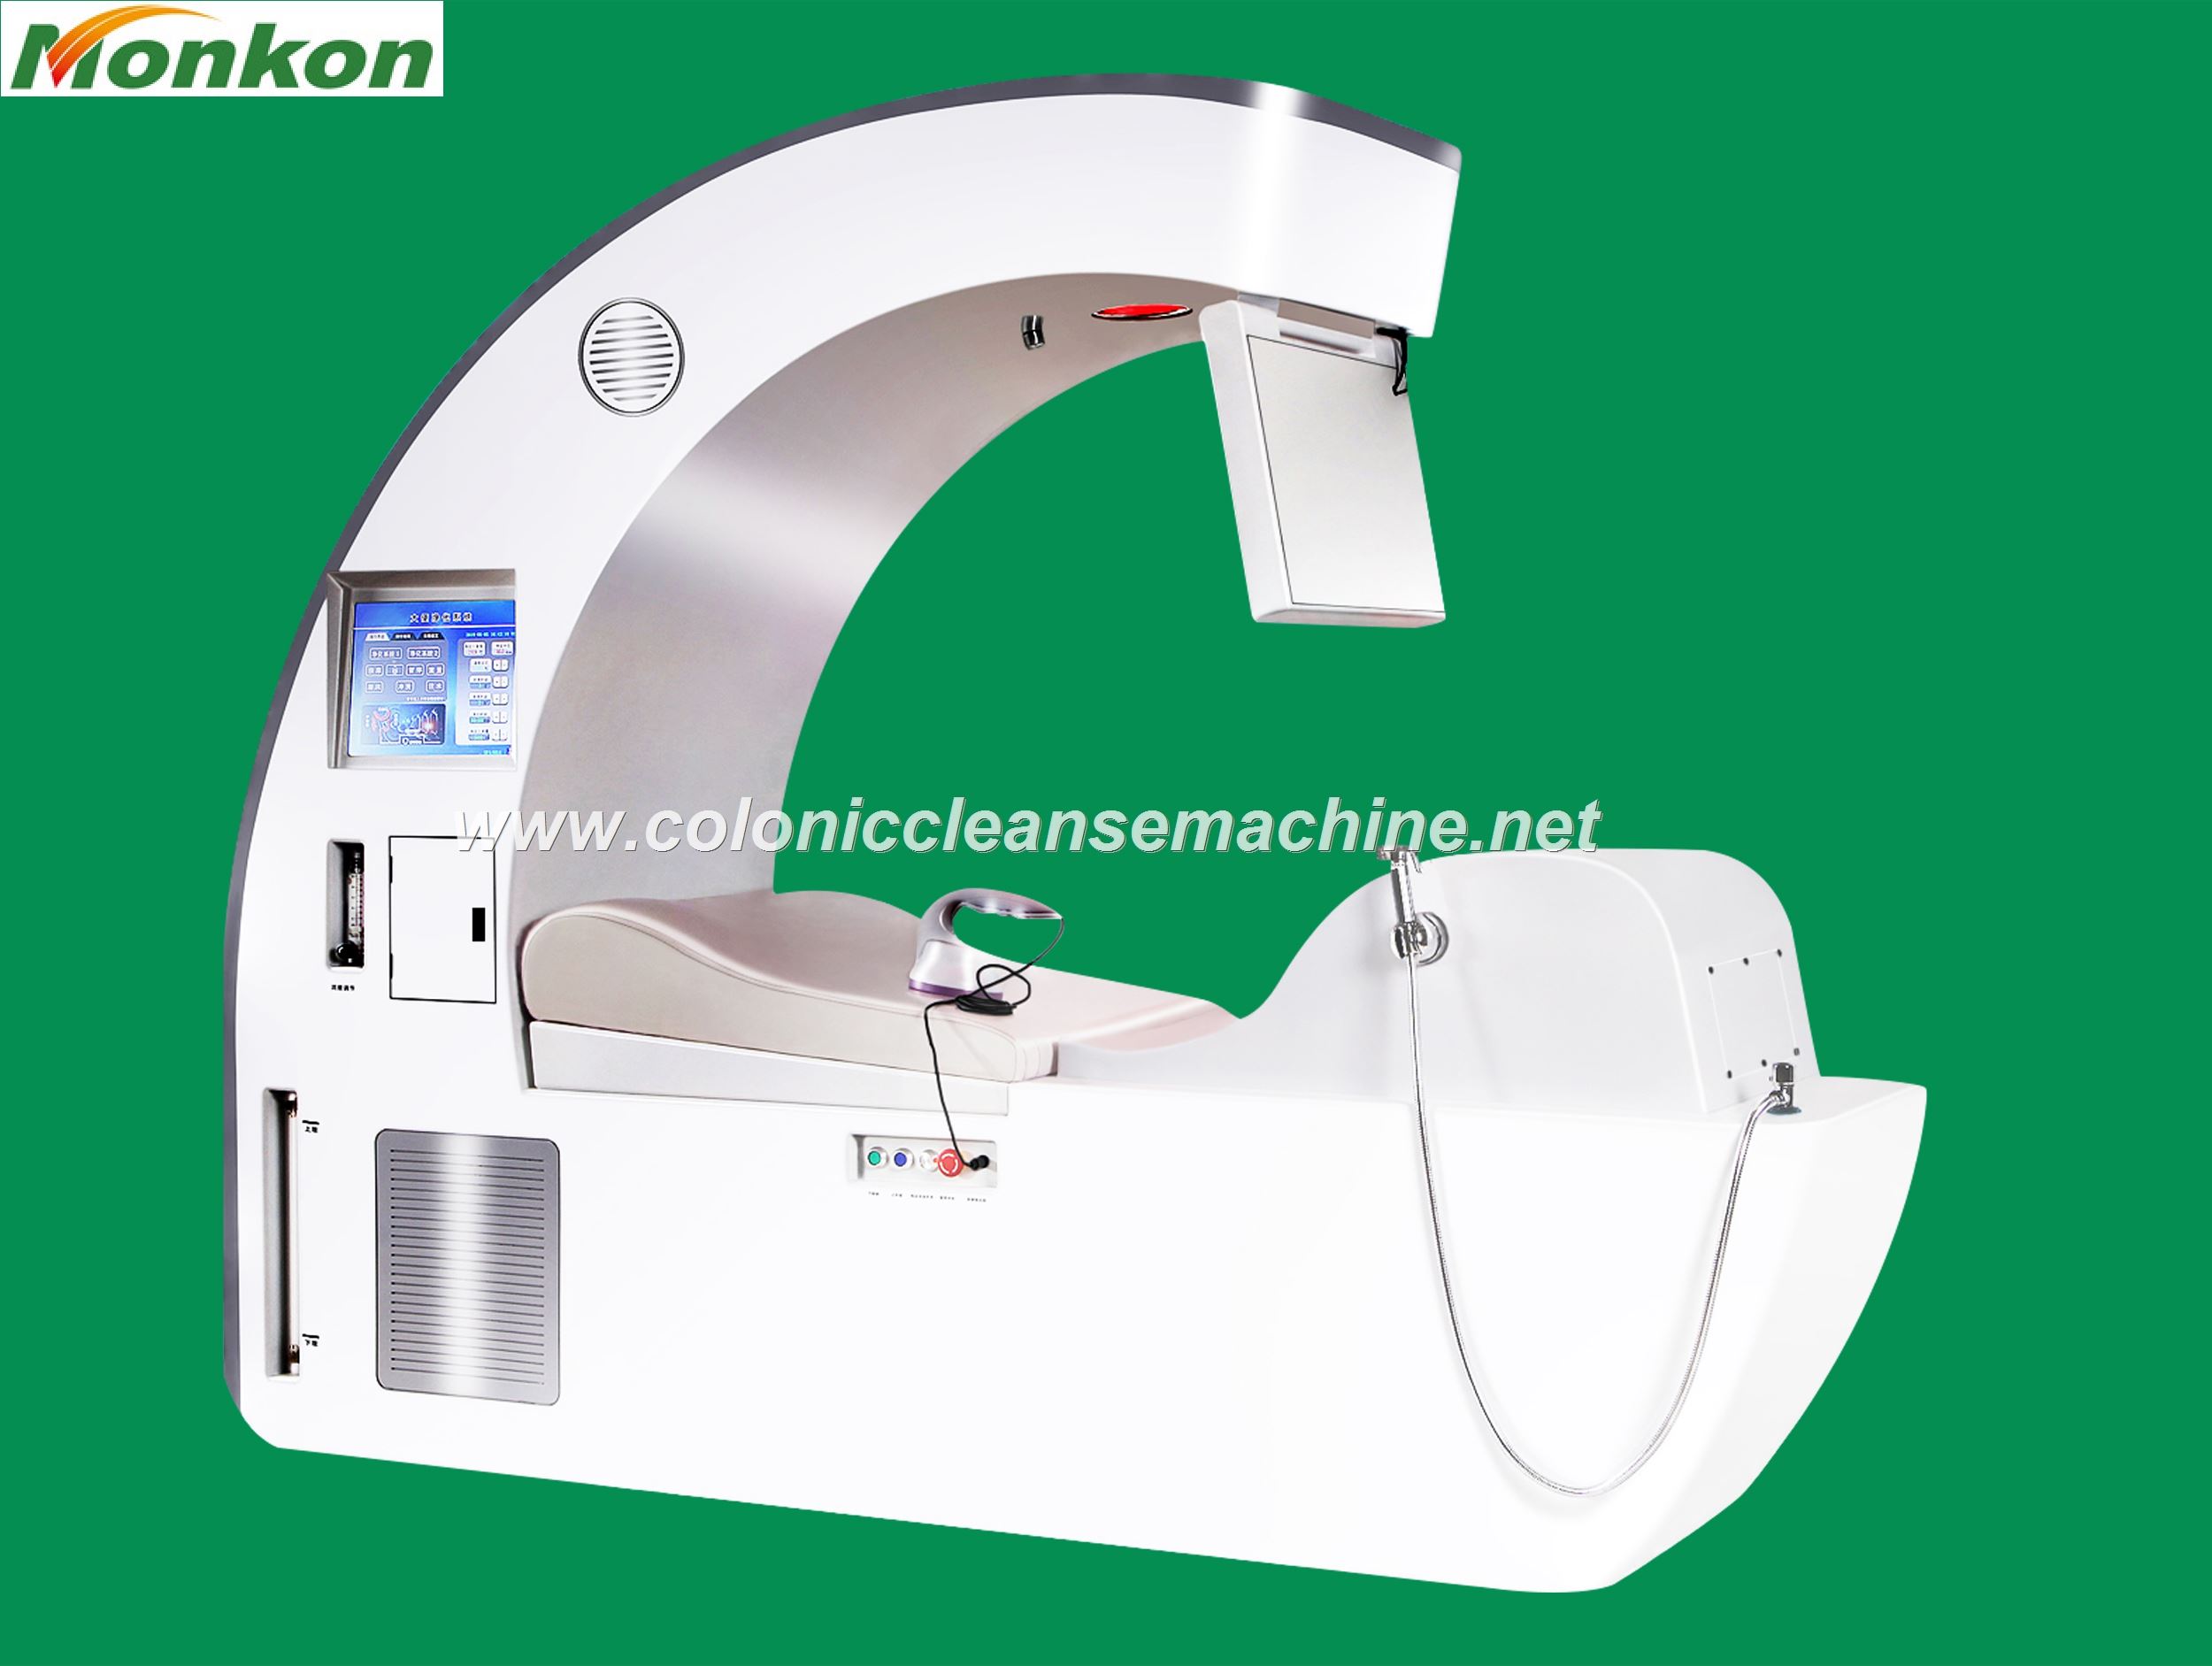 How Much Does a Colonic Machine Cost: Exploring the Price of Colon Hydrotherapy Equipment